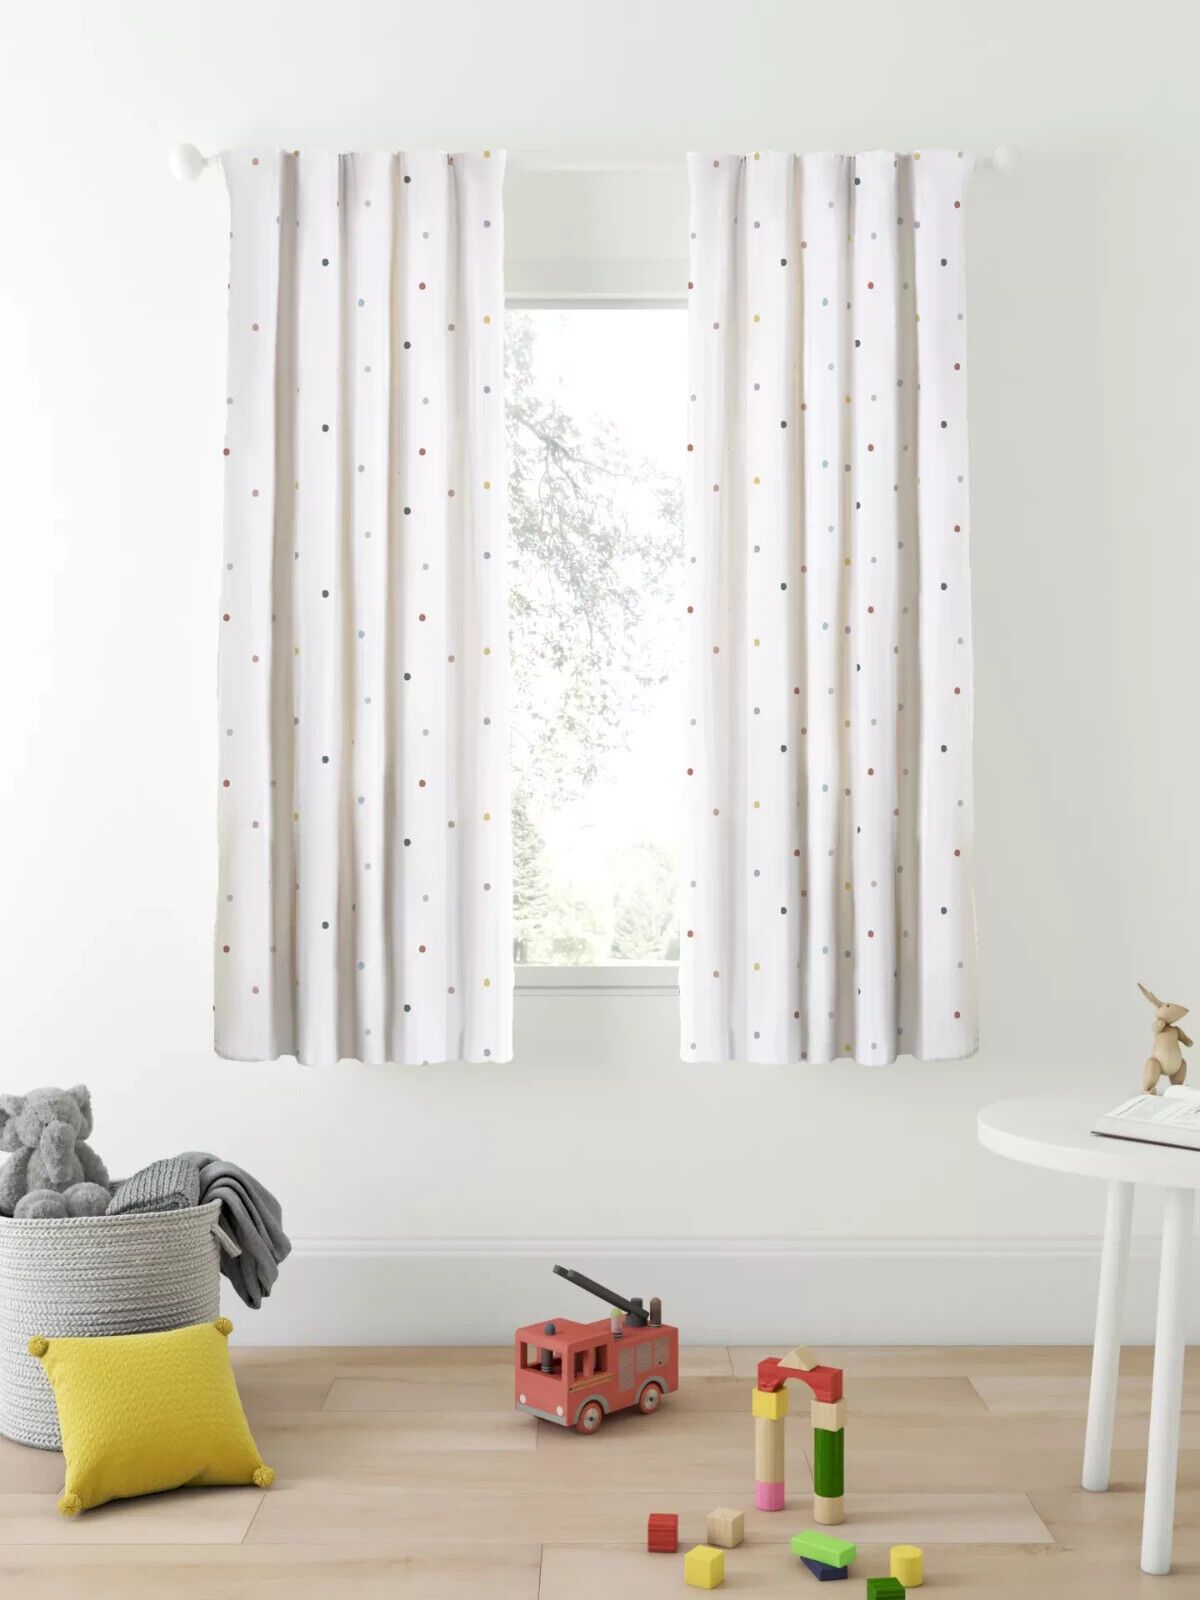 Enhance Your Nursery with Blackout Lined Curtains